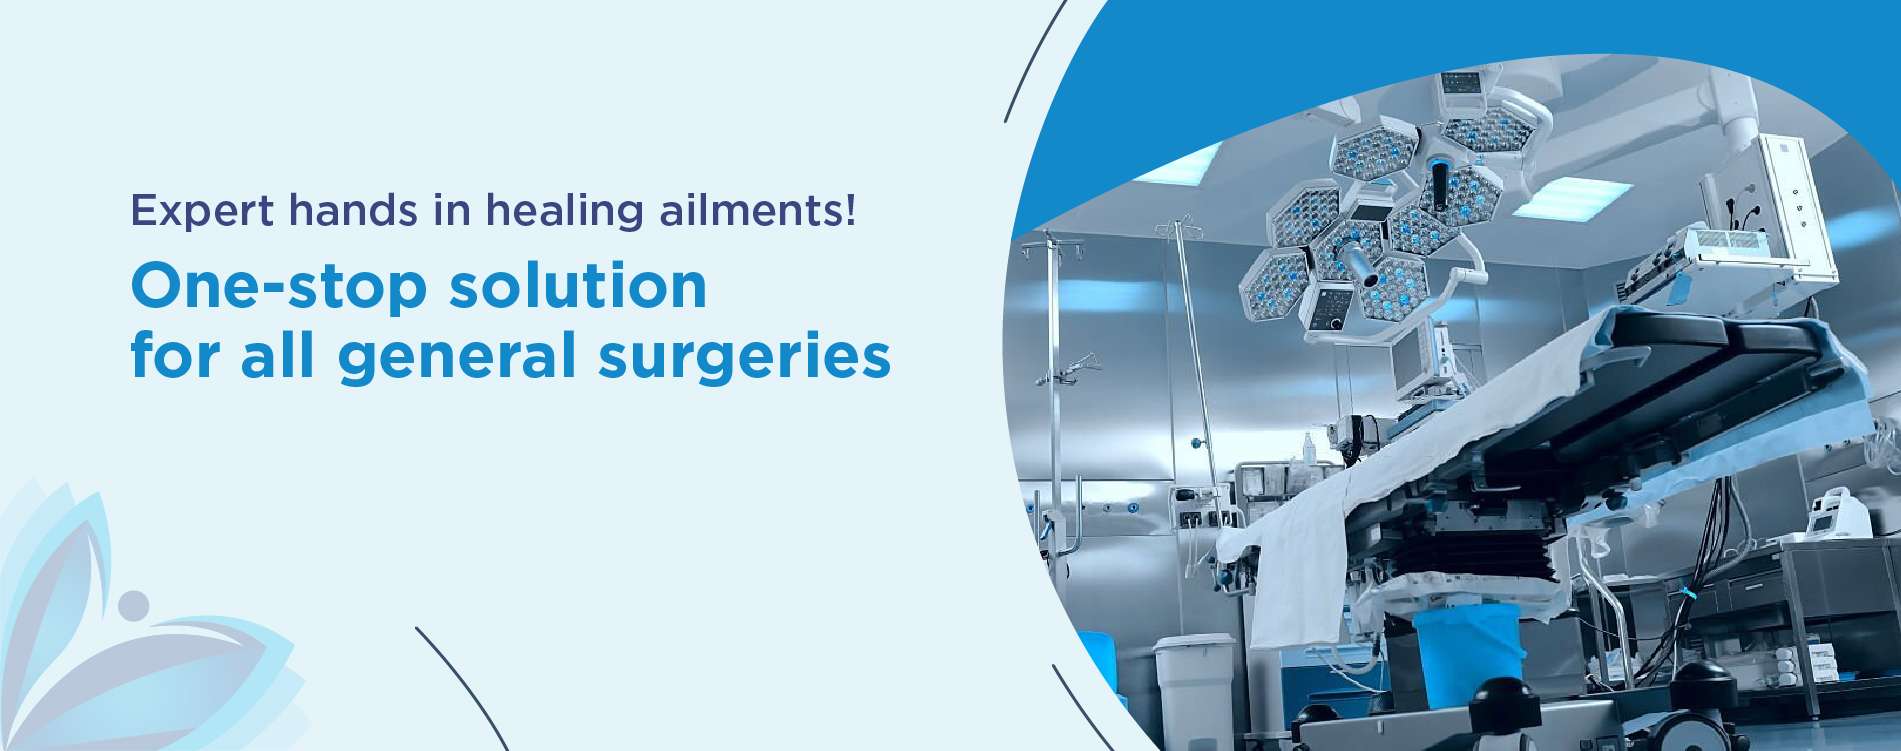 mm-hospital-one-stop-solution-for-all-general-surgeries